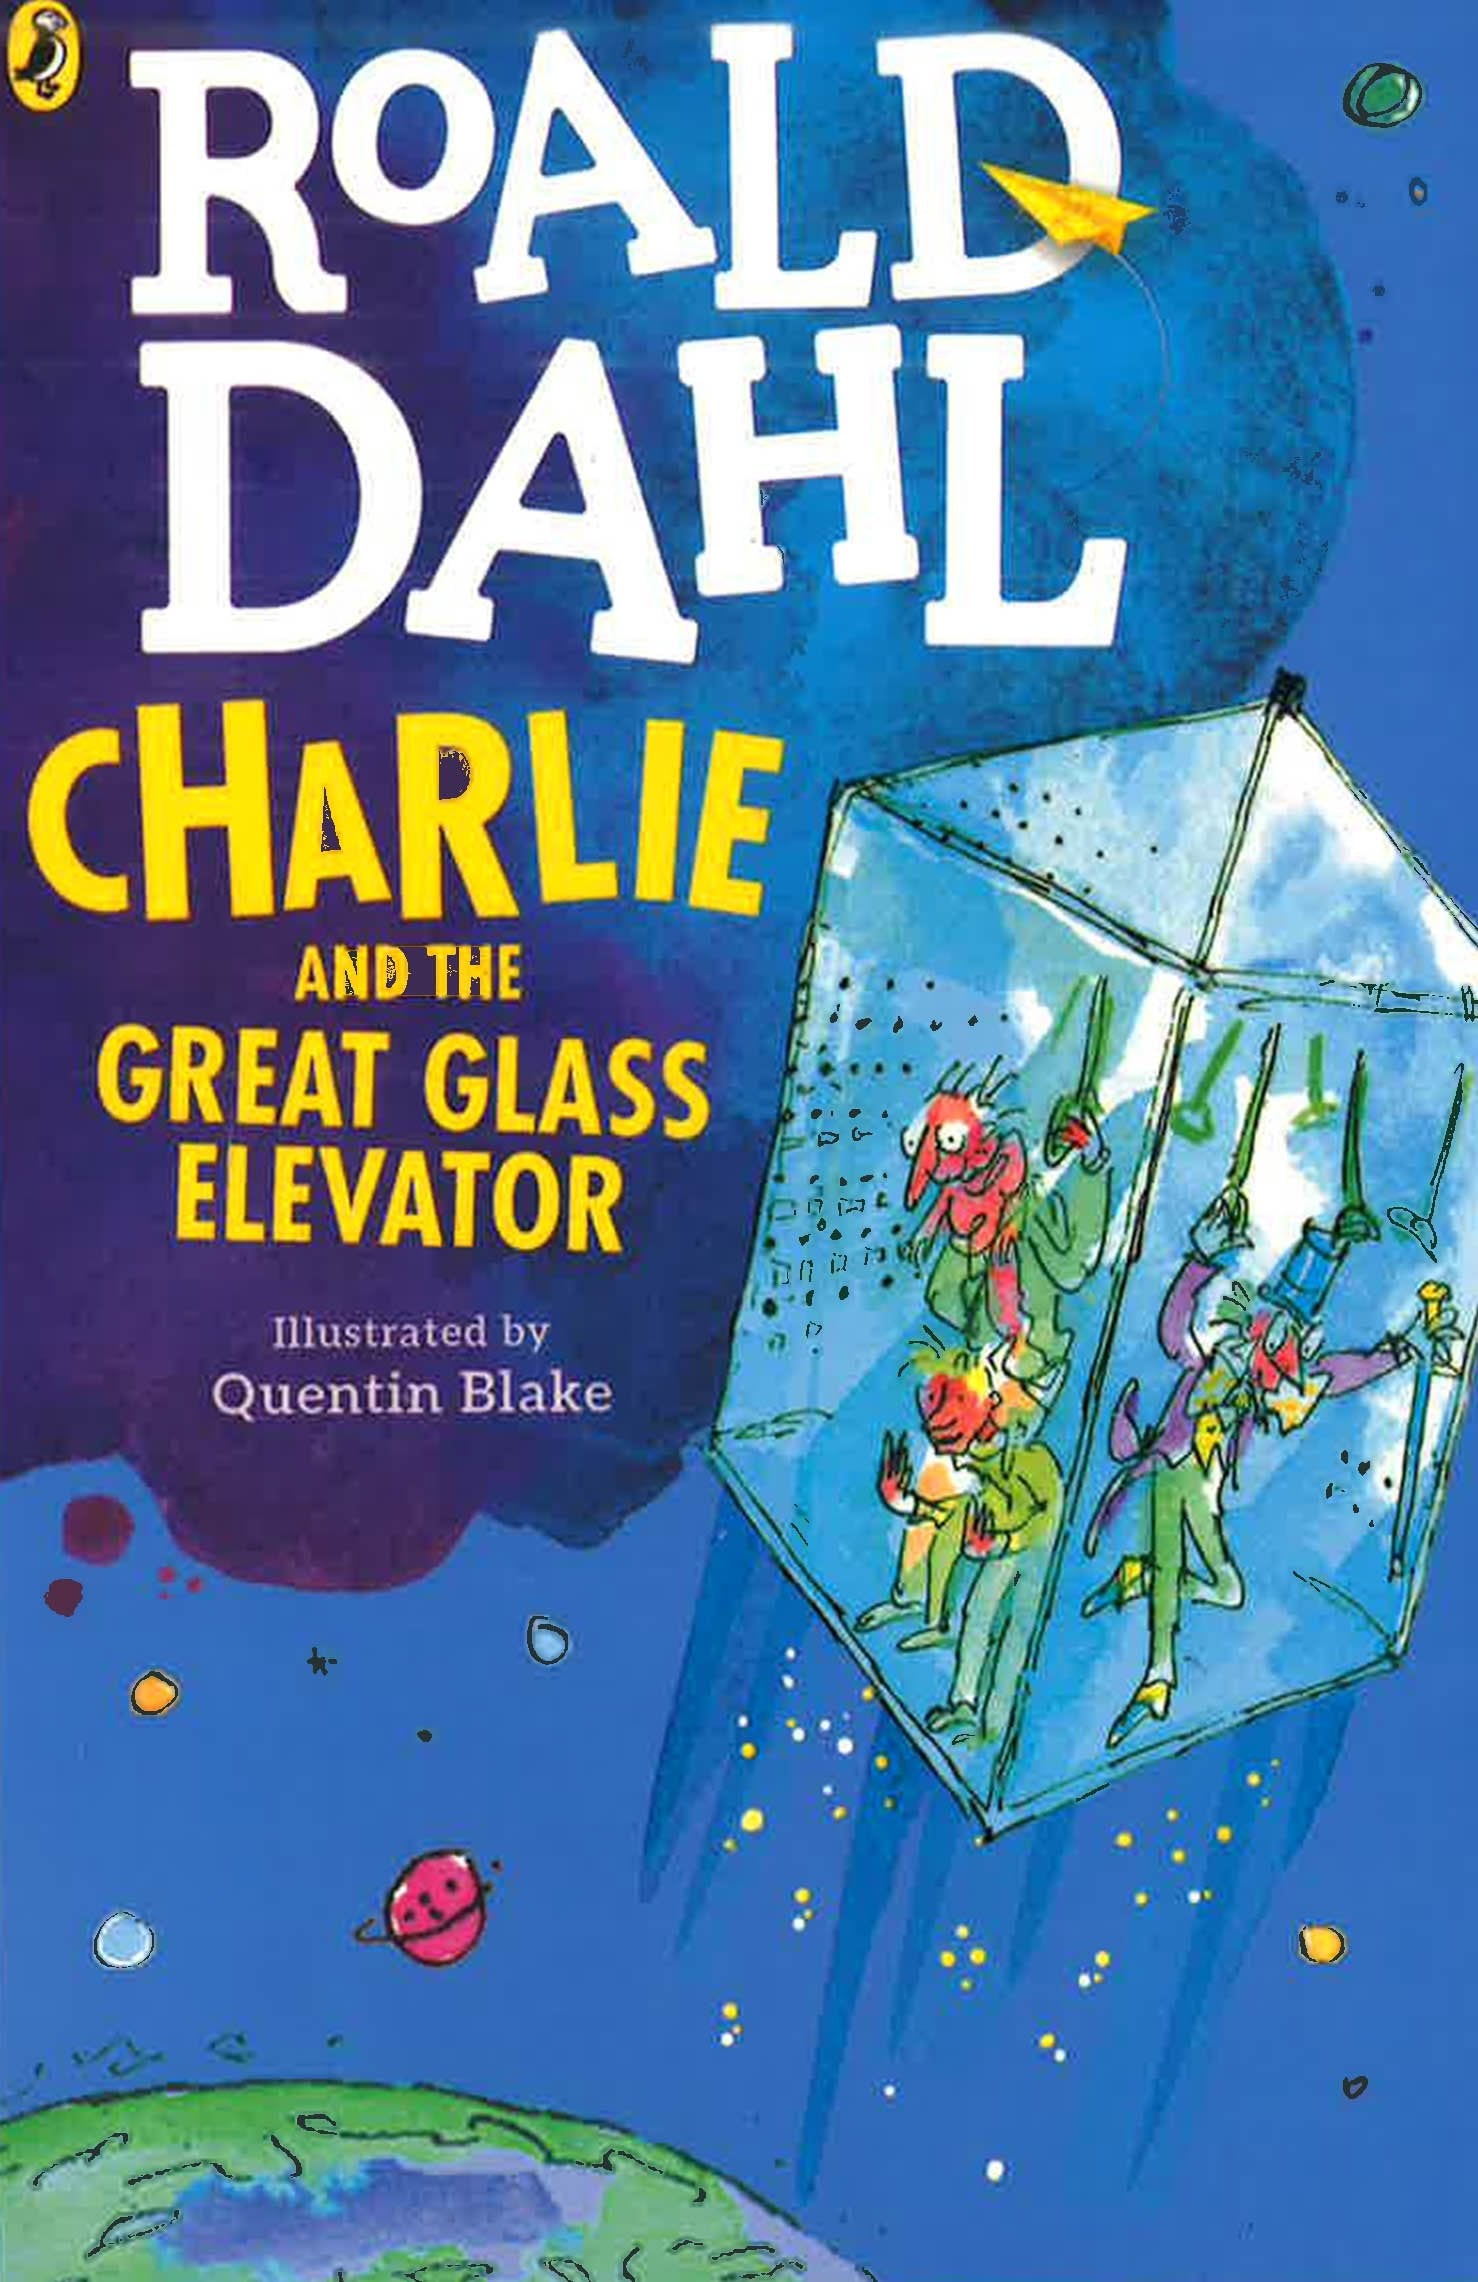 Roald　–　Dahl:　And　Elevator　Charlie　The　Glass　Great　BookXcess